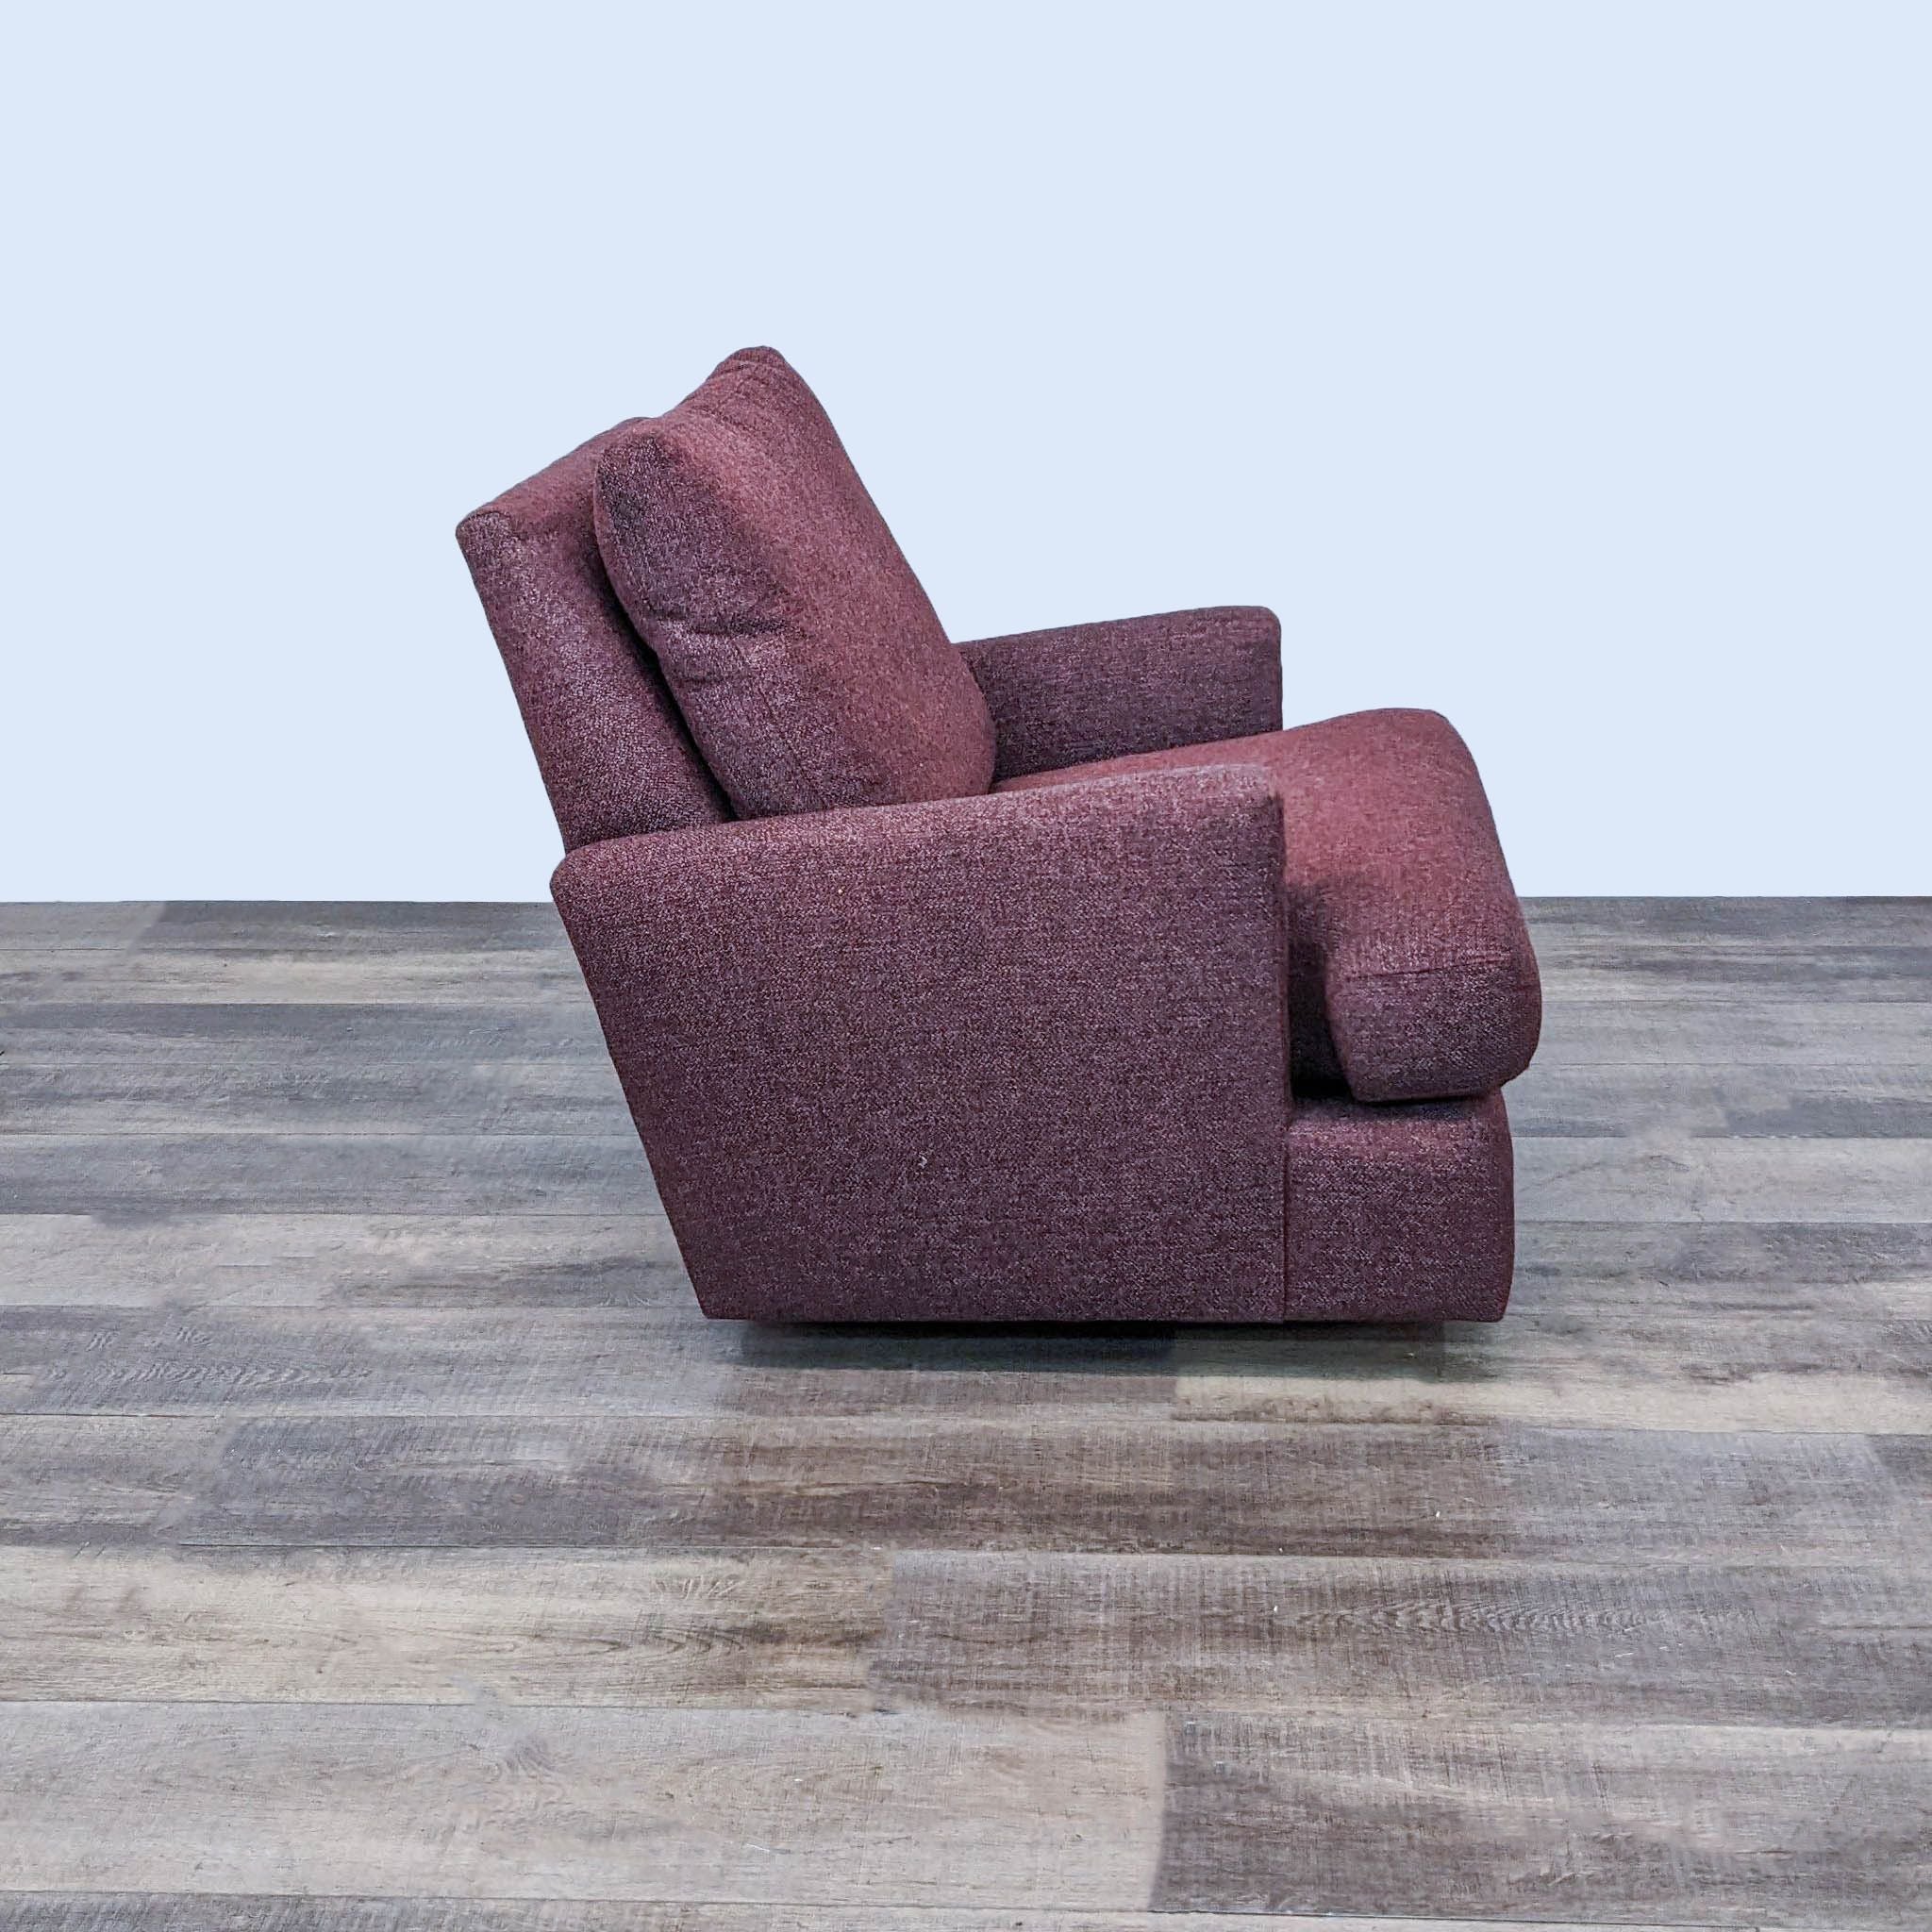 Room & Board swivel glider lounge chair, side angle view, showcasing the linen fabric upholstery in burgundy on a wooden floor.